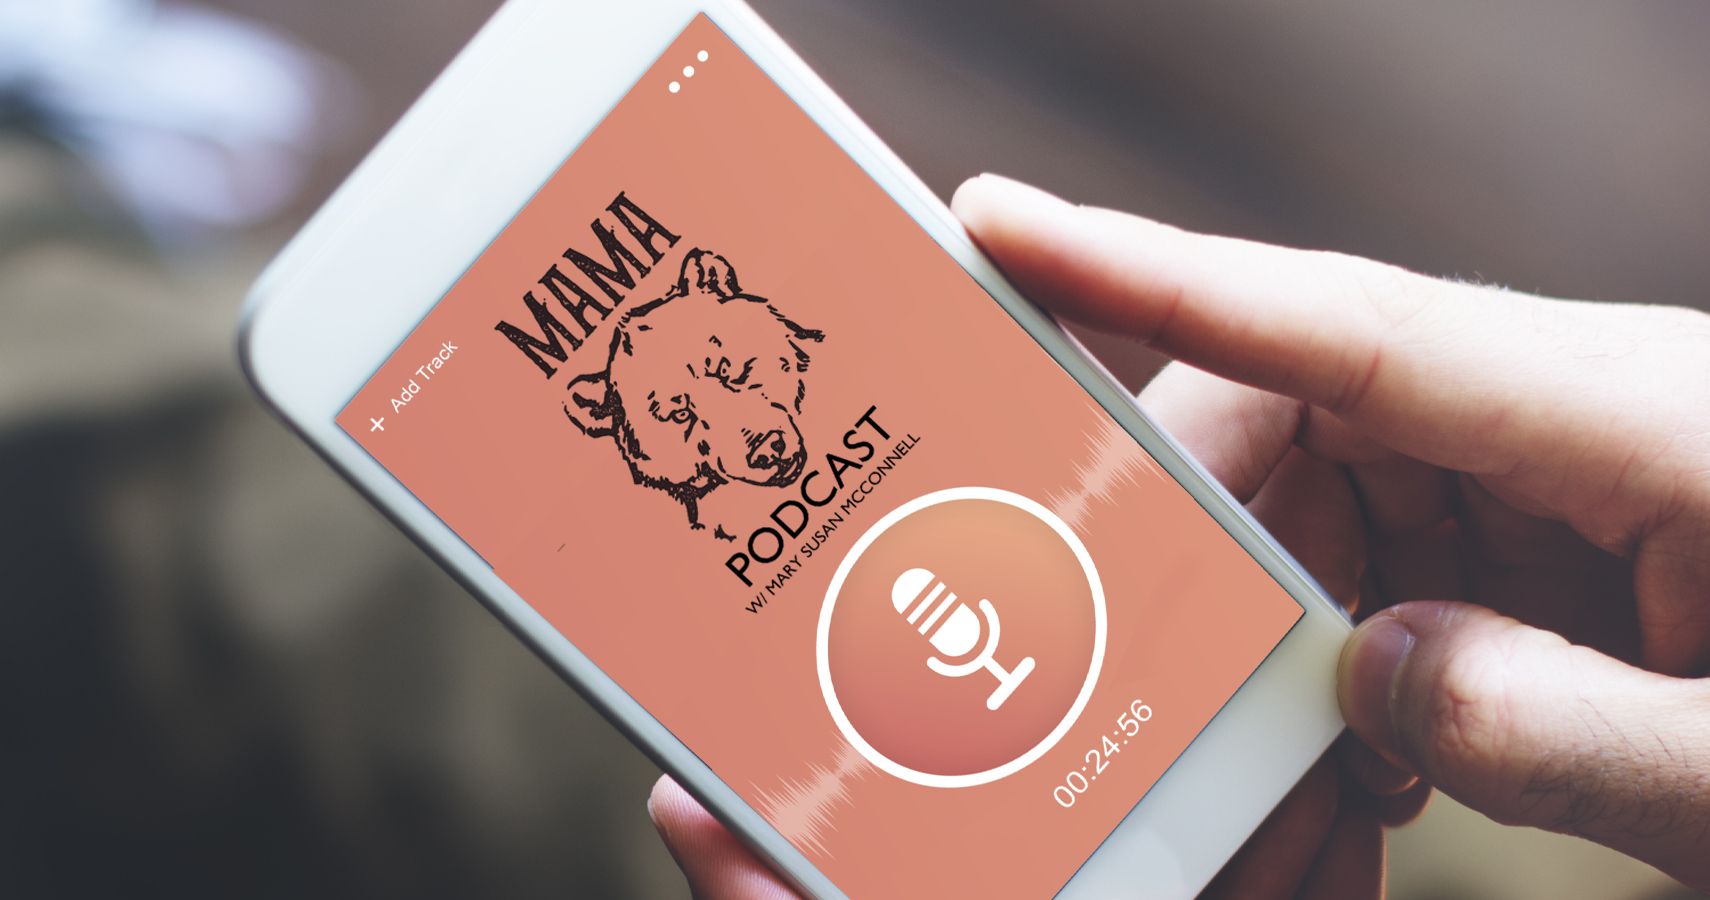 Moms of Special Needs Kids, the “Mama Bear” Podcast is for You